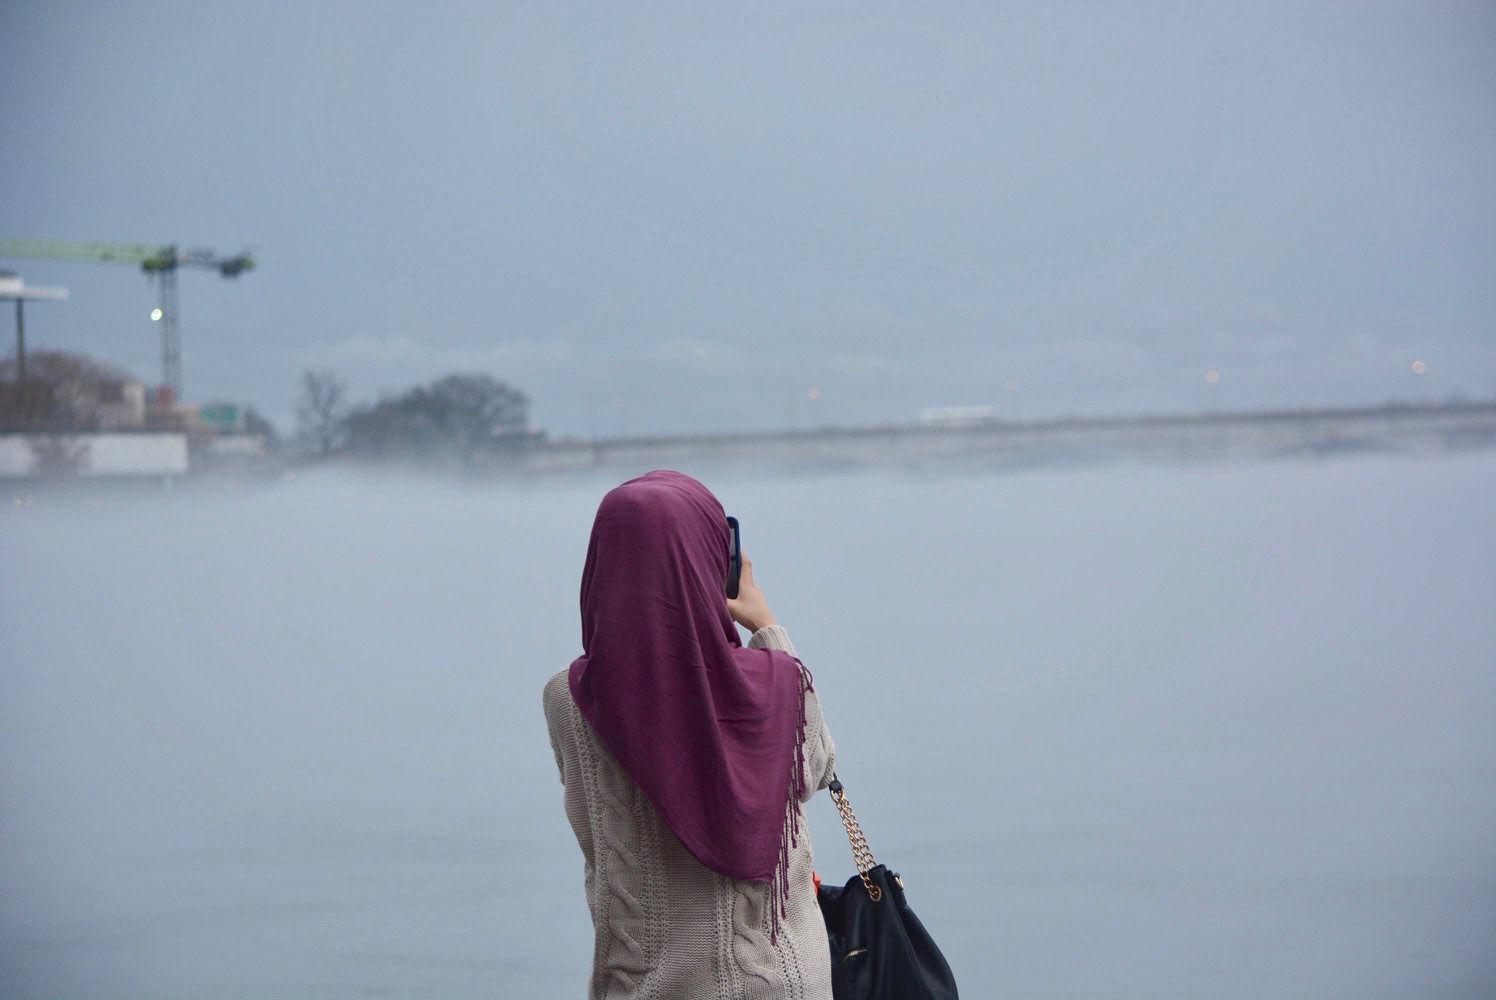 A woman snaps a photo of the deep blanket of fog that rose off the cold waters of the Potomac River on Friday, Jan. 12, 2018 amid a mid-January warmup. (WTOP/Dave Dildine)